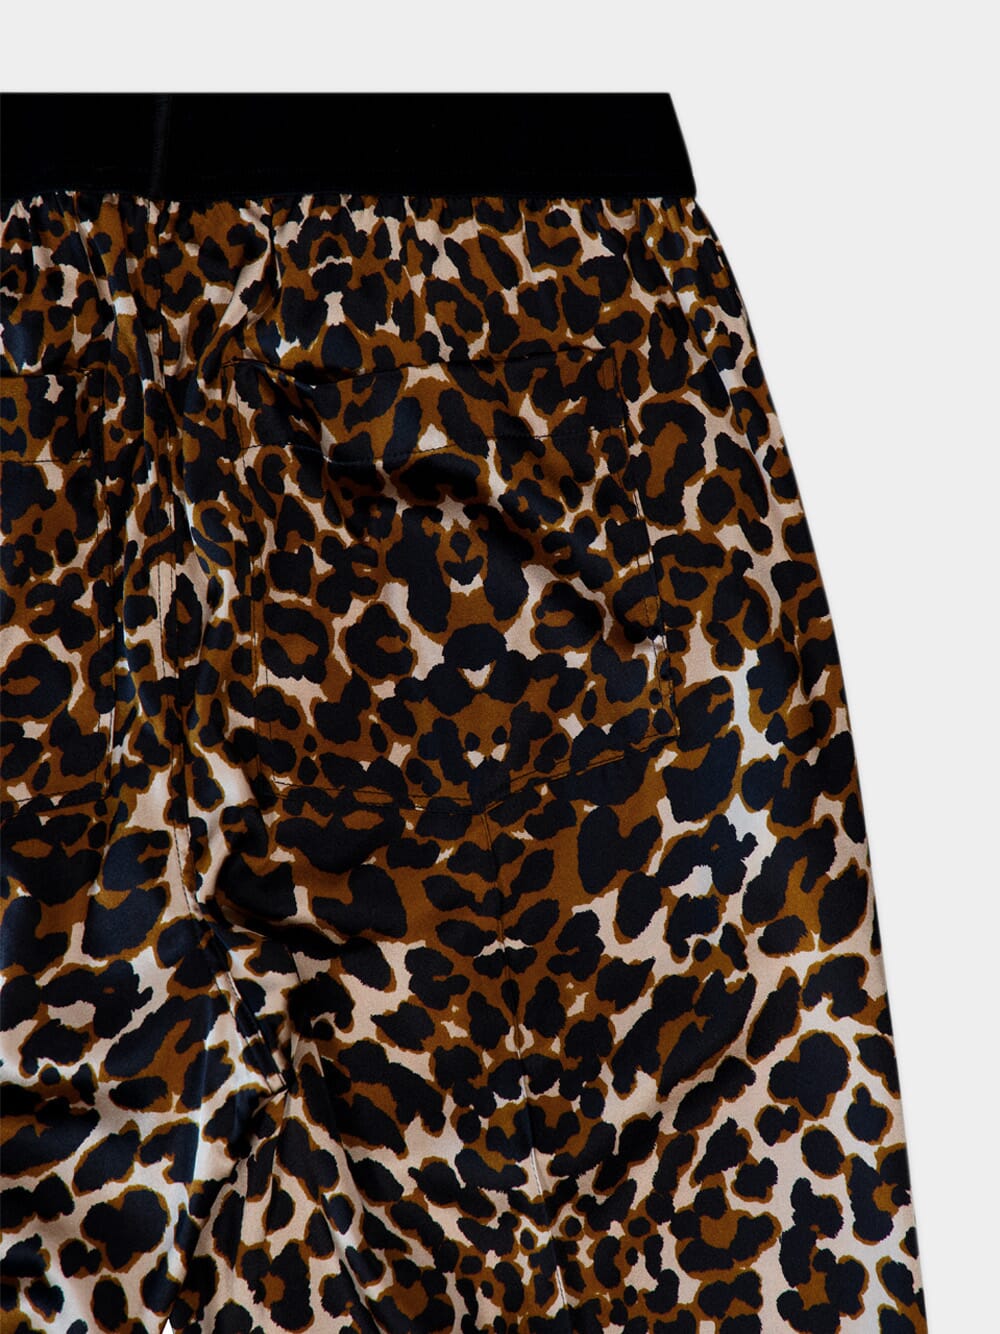 Tom FordLeopard-Print Straight-Leg Trousers at Fashion Clinic